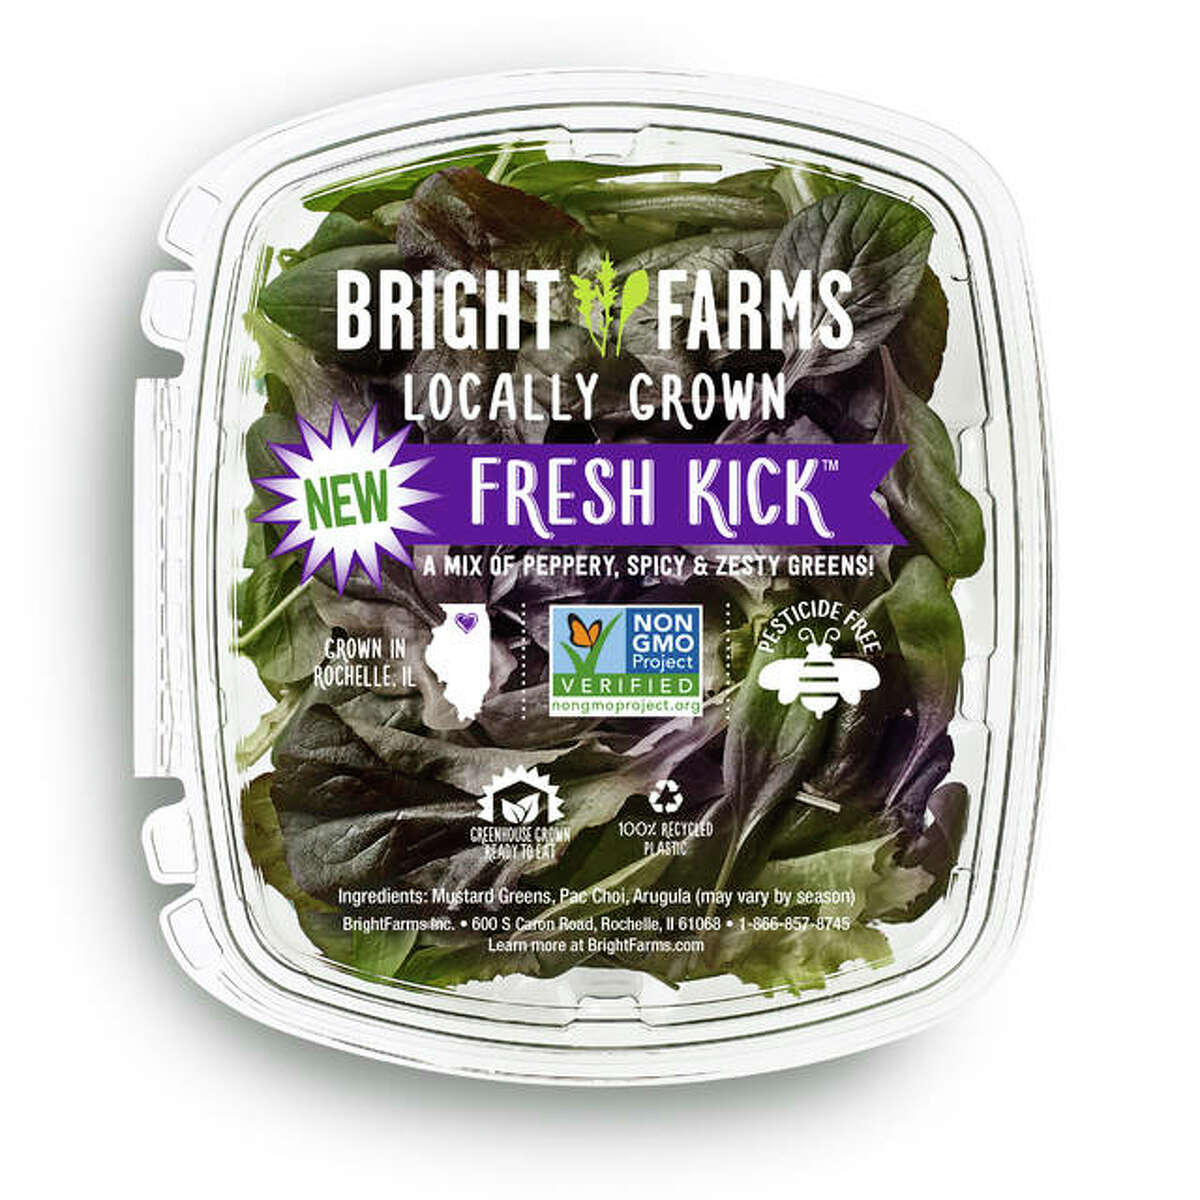 Fresh Kick is one of the seven BrightFarms lettuce and greens varieties available at Edwardsville’s Dierberg’s.